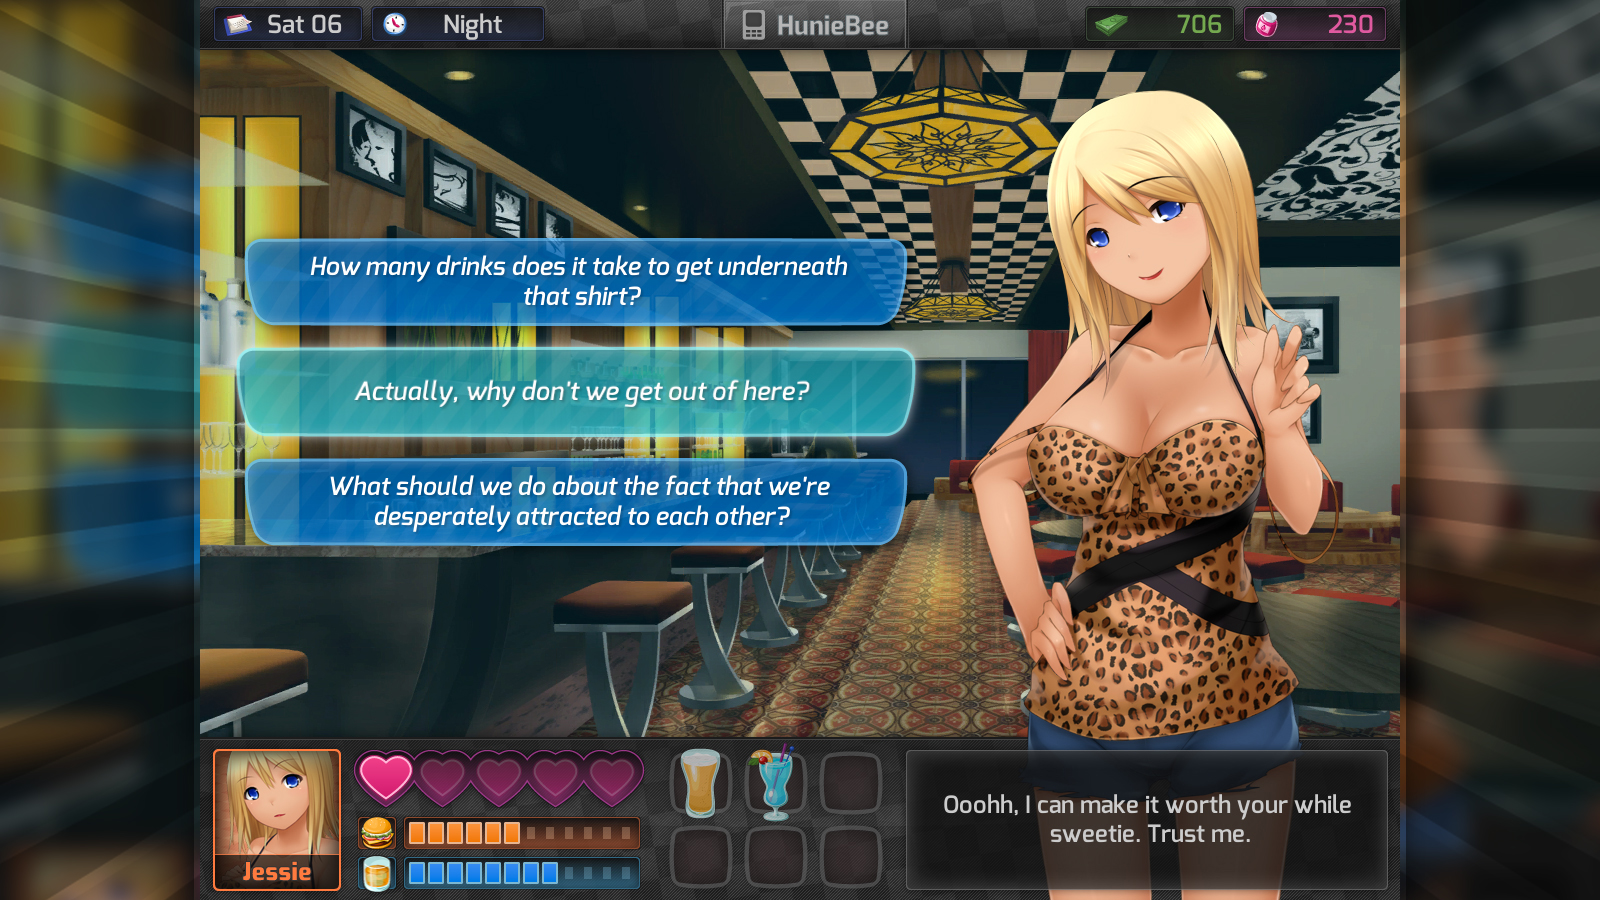 how to sext in huniepop